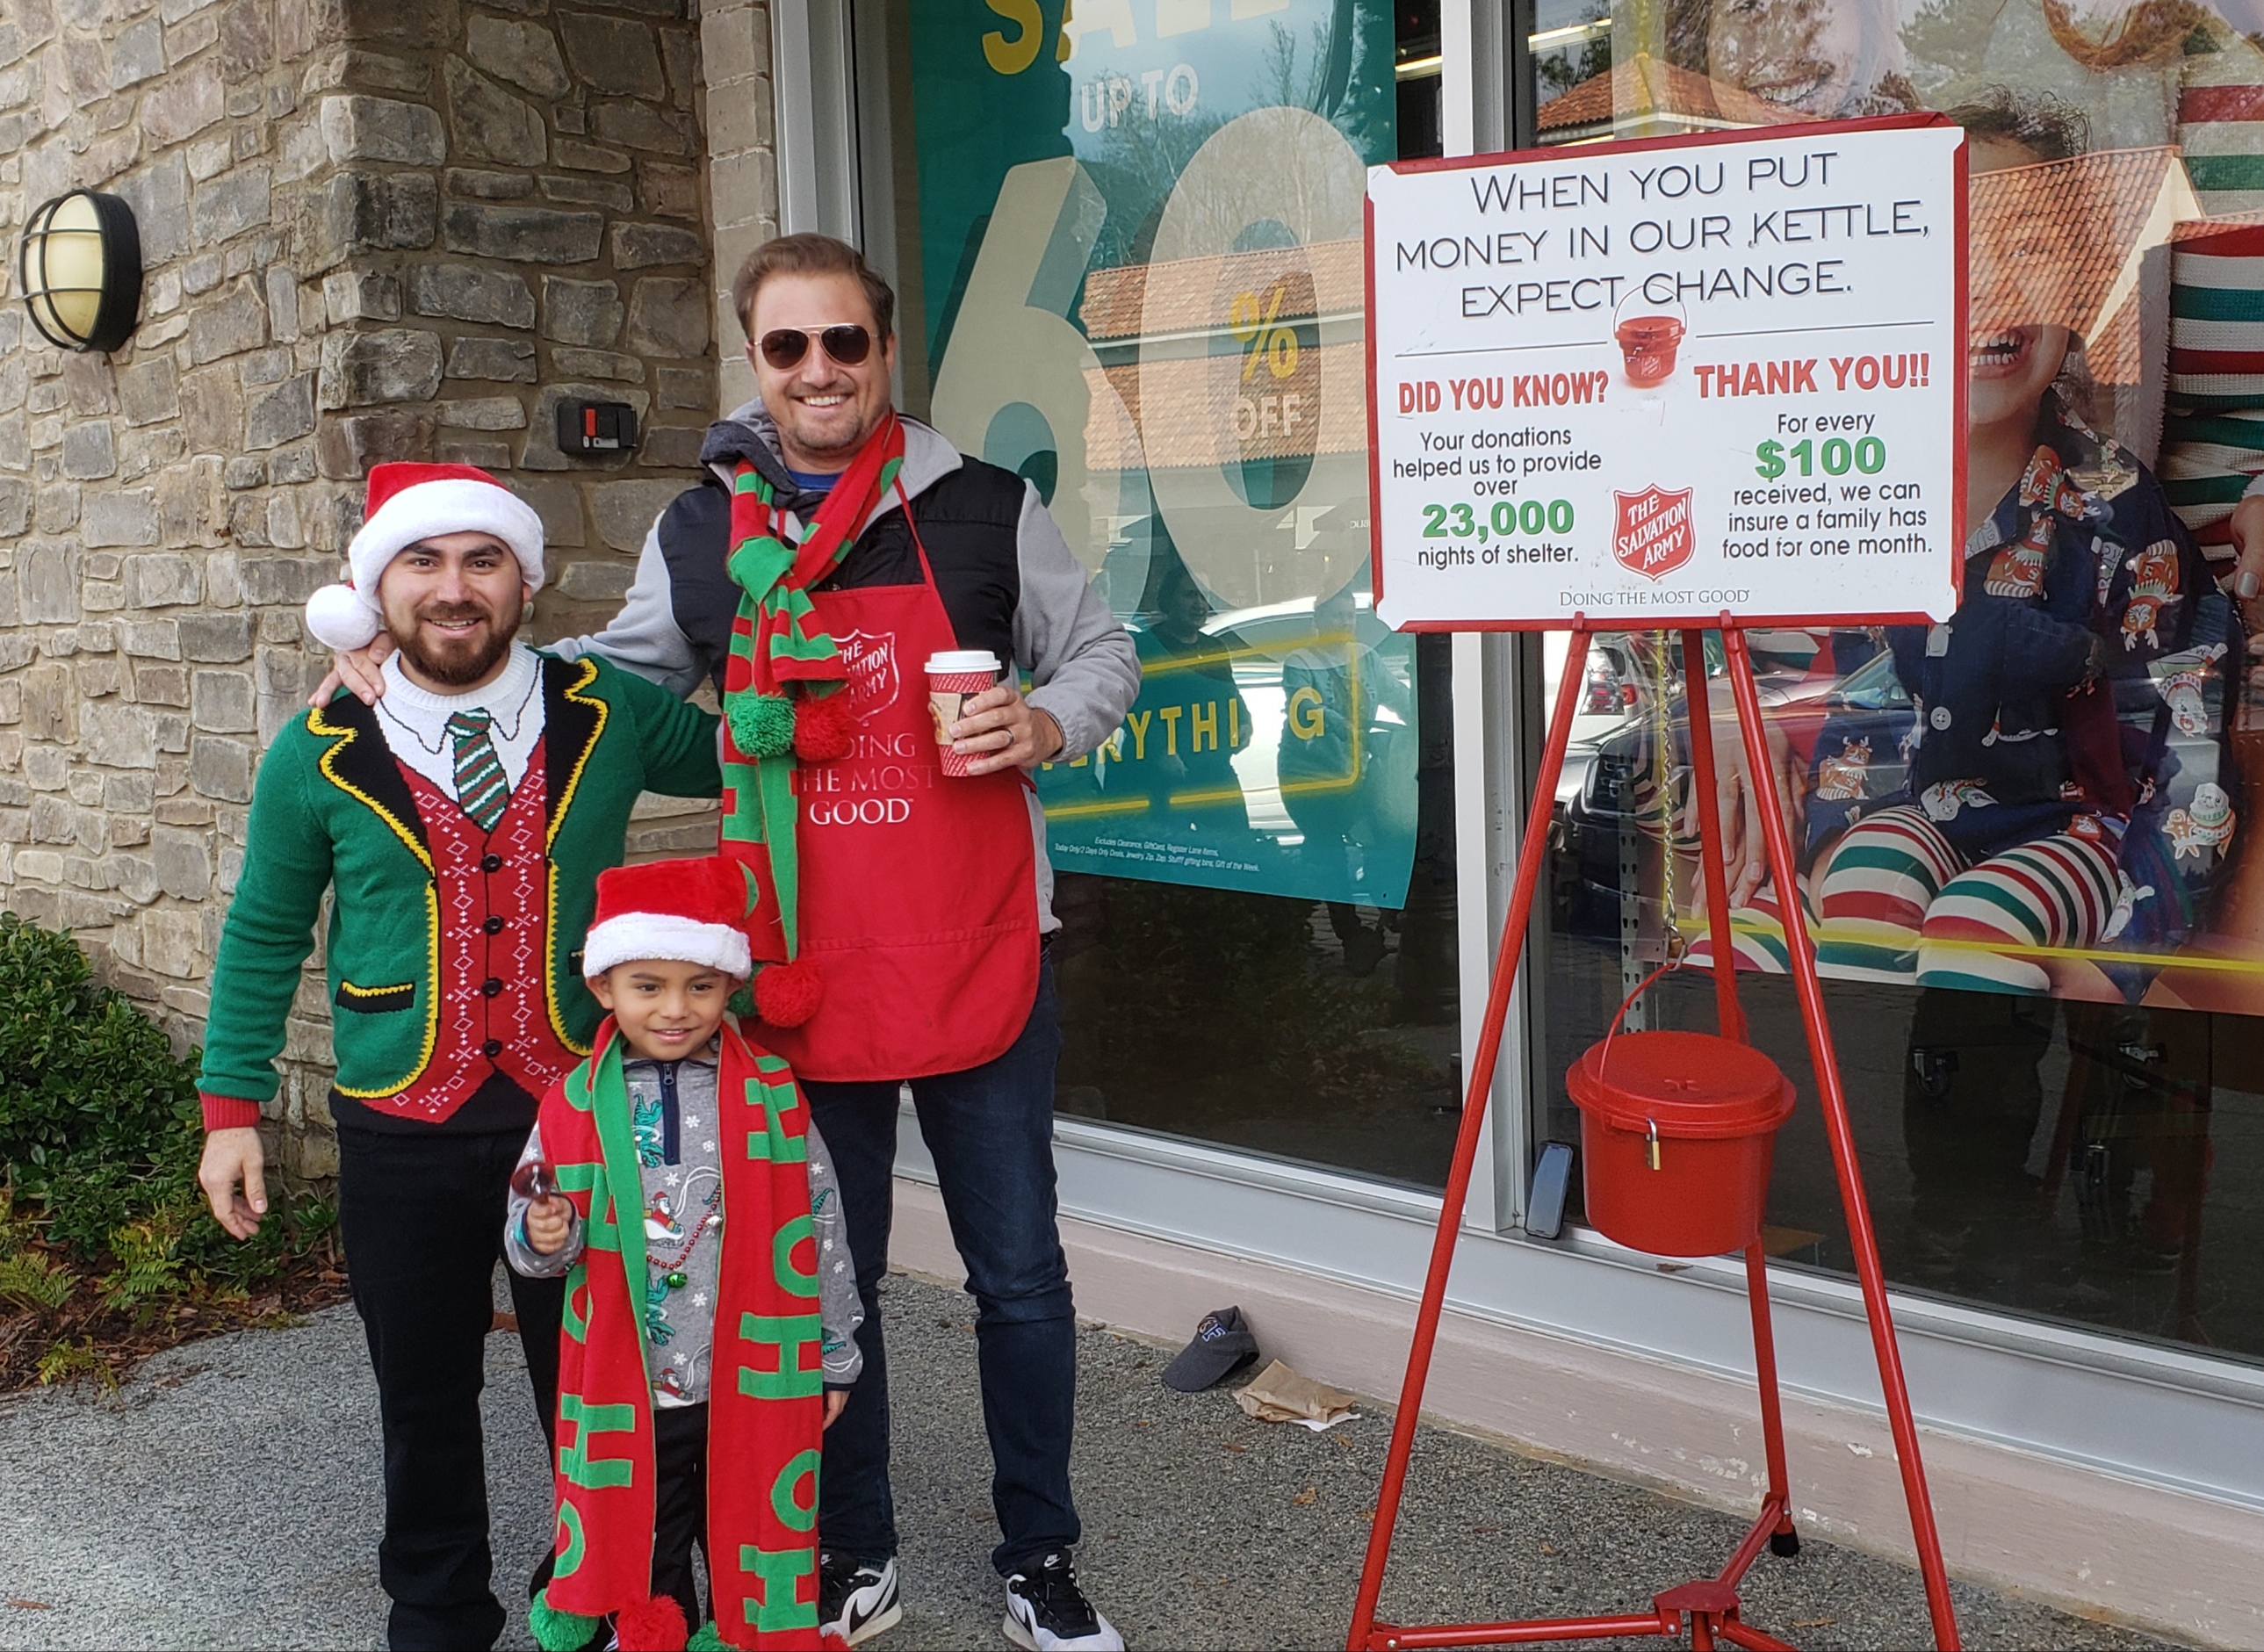 Members of our senior staff and their families ringing bells for the Salvation Army